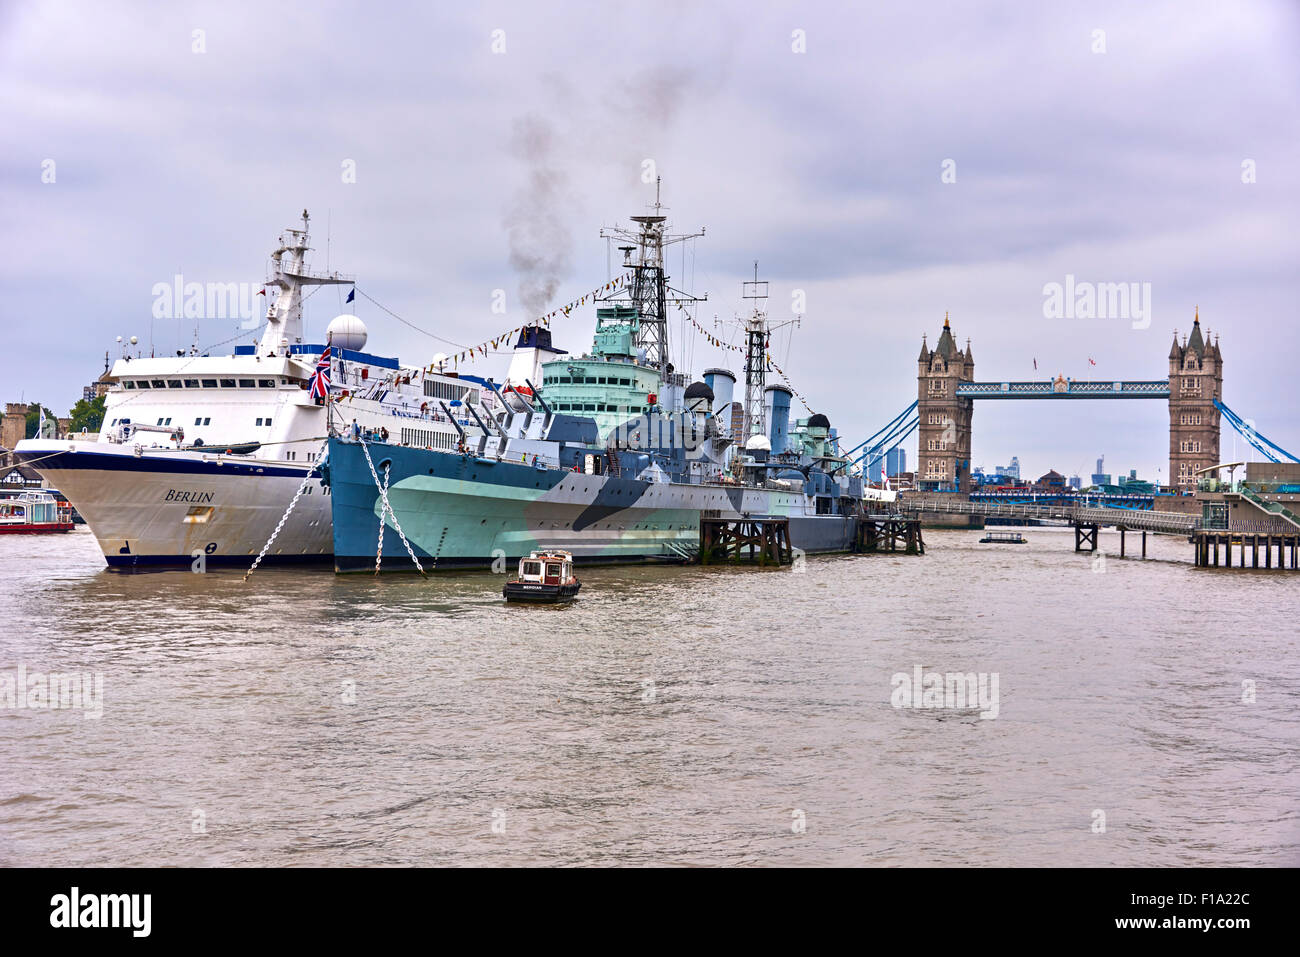 HMS Belfast is a museum ship, originally a Royal Navy light cruiser, permanently moored in London on the River Thames Stock Photo